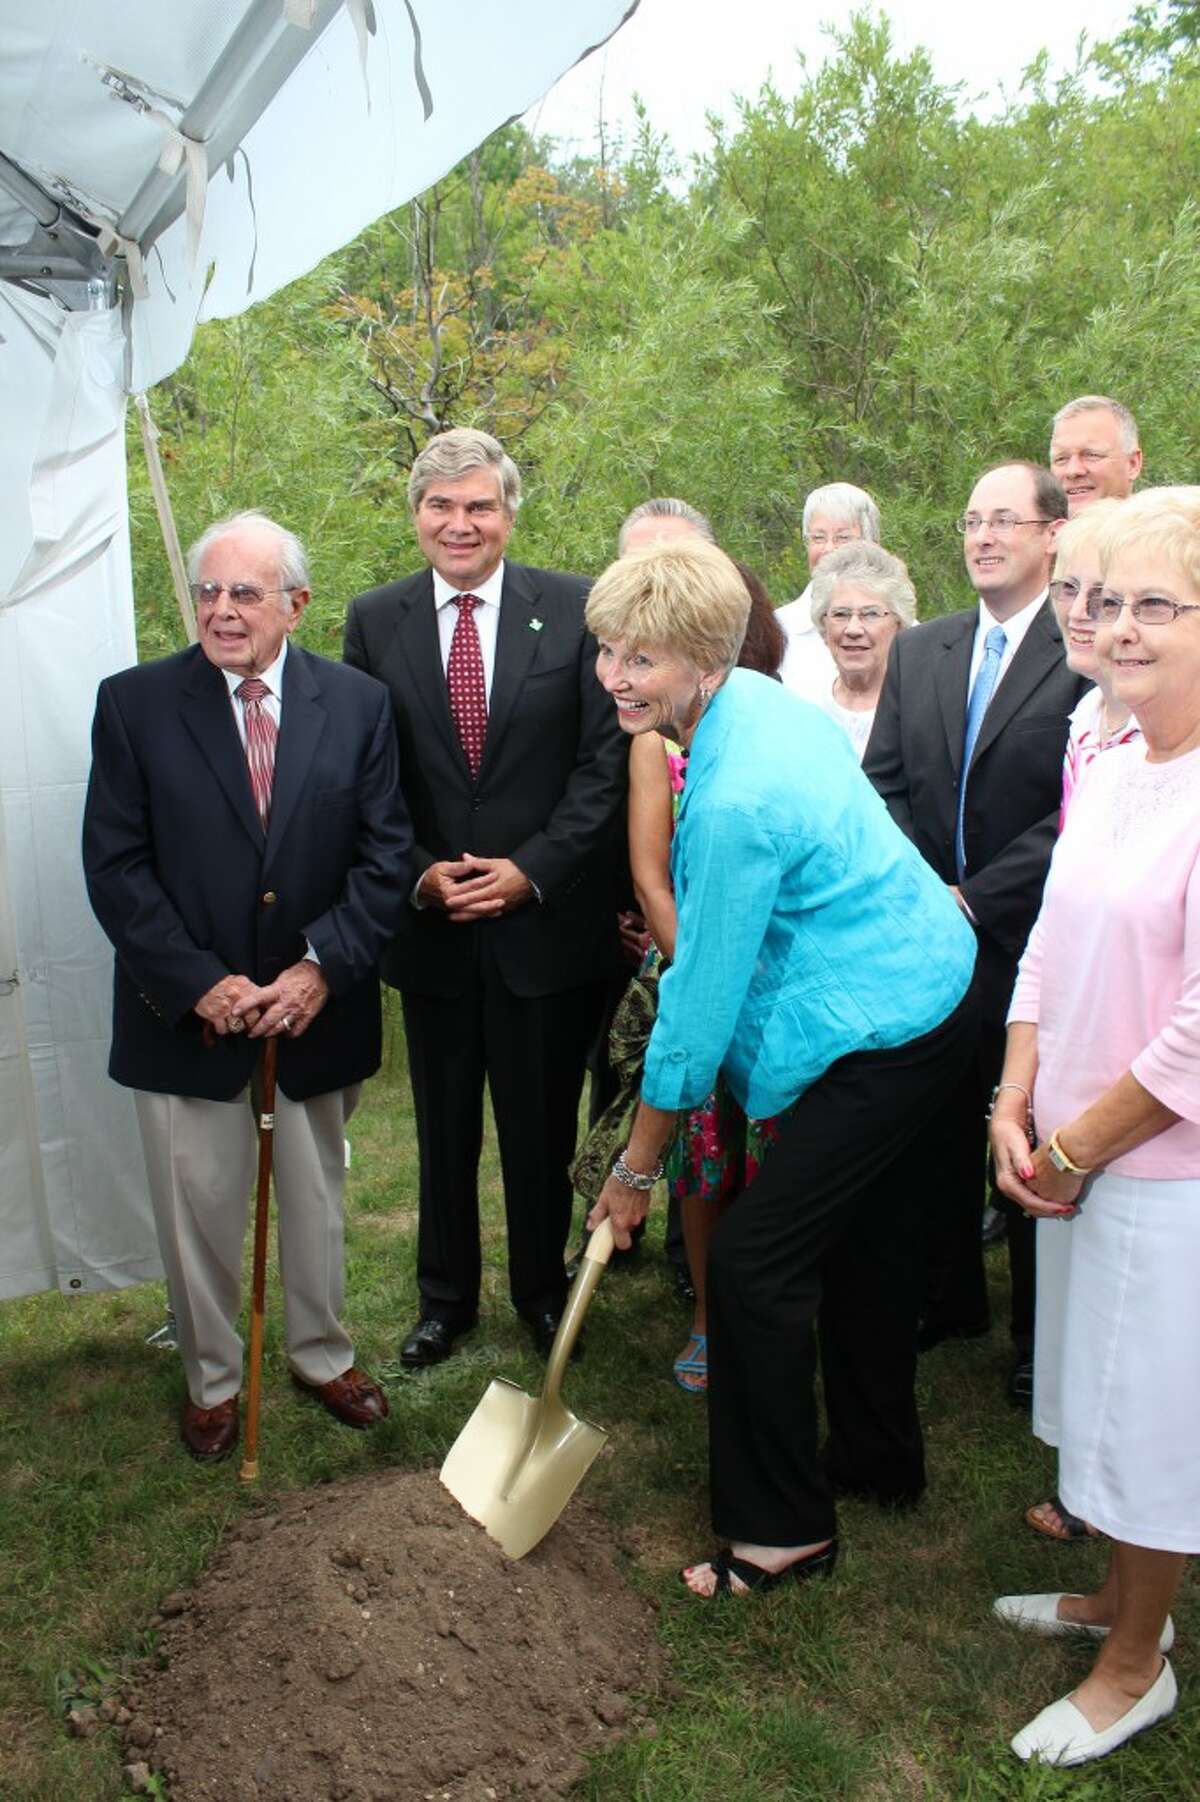 GROUND BREAKING: Susan Wheatlake (center) breaks ground for the $8.9 million Susan P. Wheatlake Regional Cancer Center. The facility is scheduled to open in summer 2013.